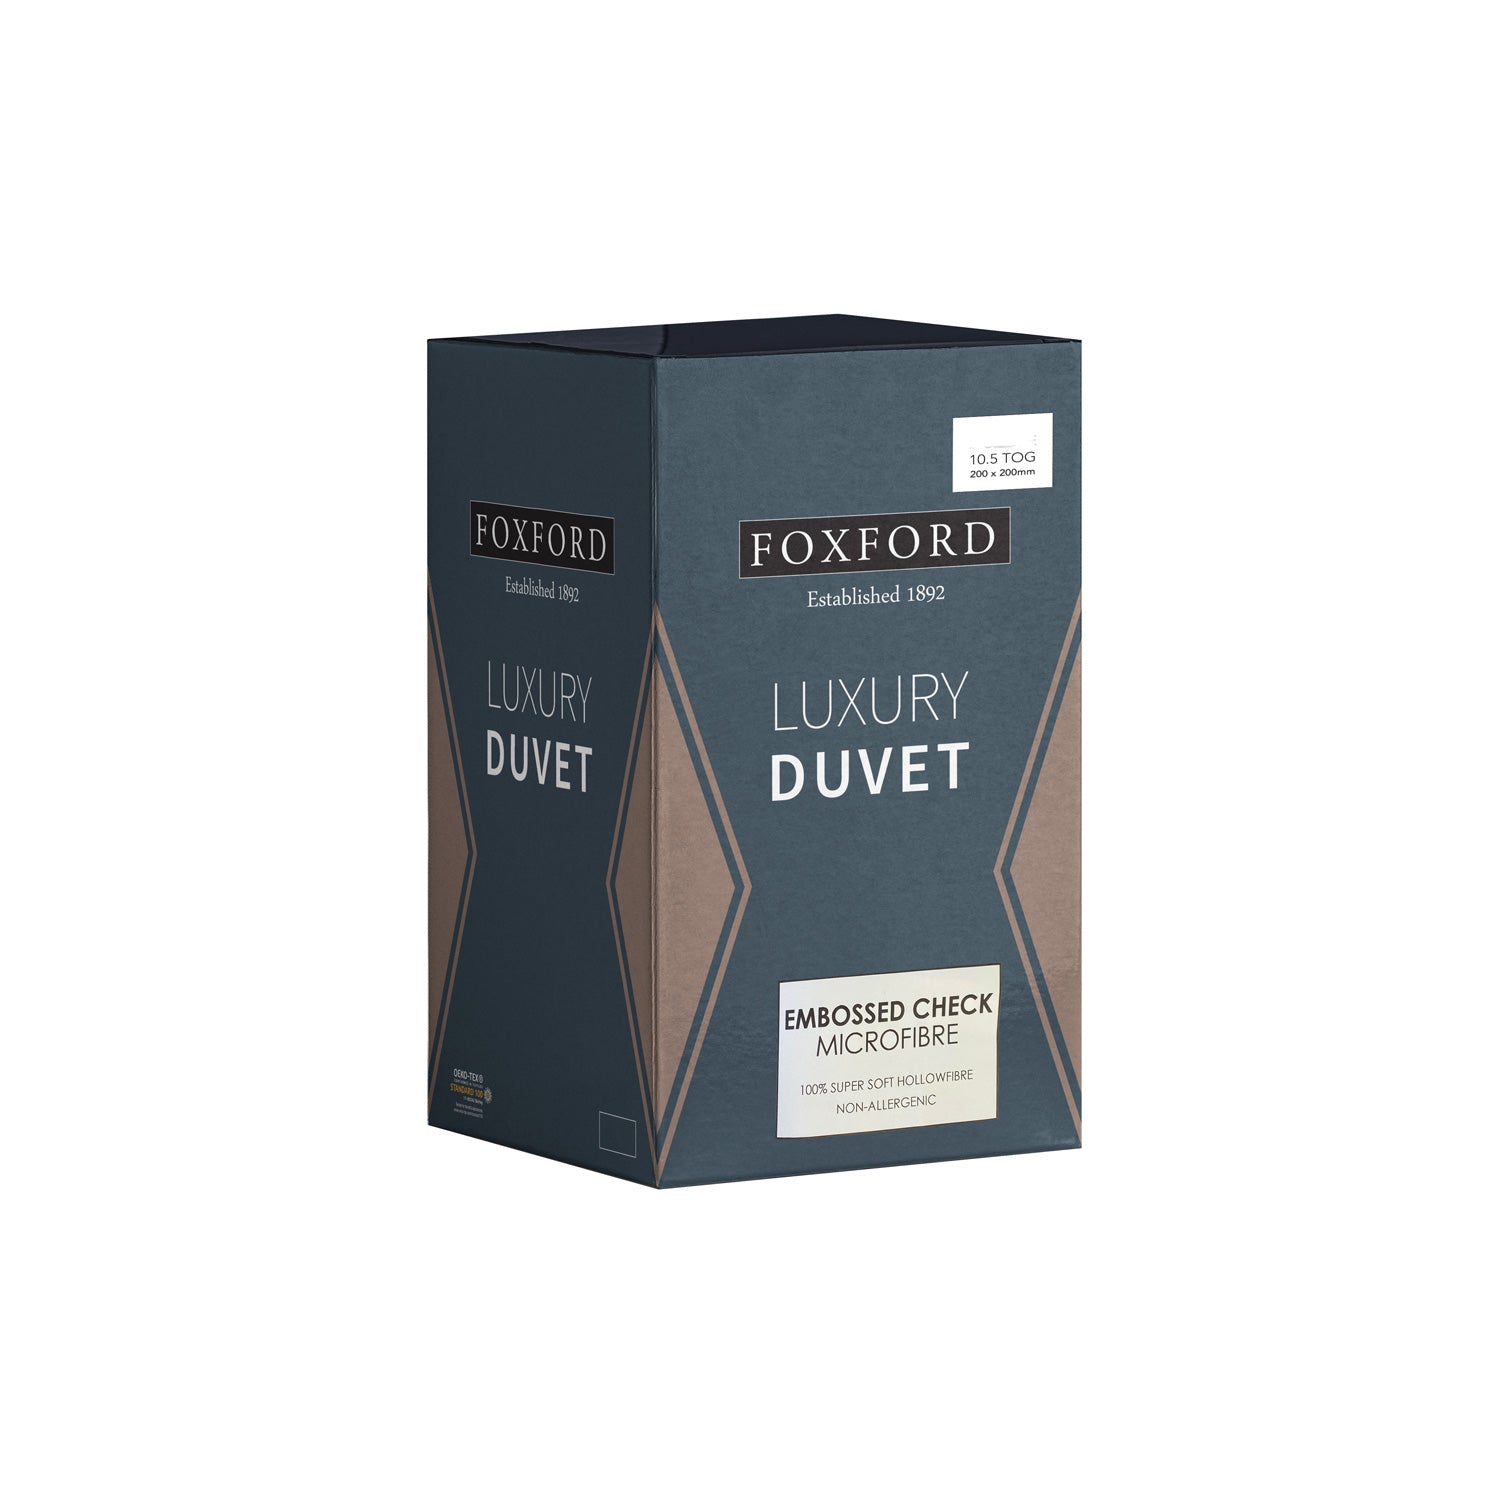 Foxford Embossed Luxury Duvet 10.5 Tog - Double Bed 1 Shaws Department Stores